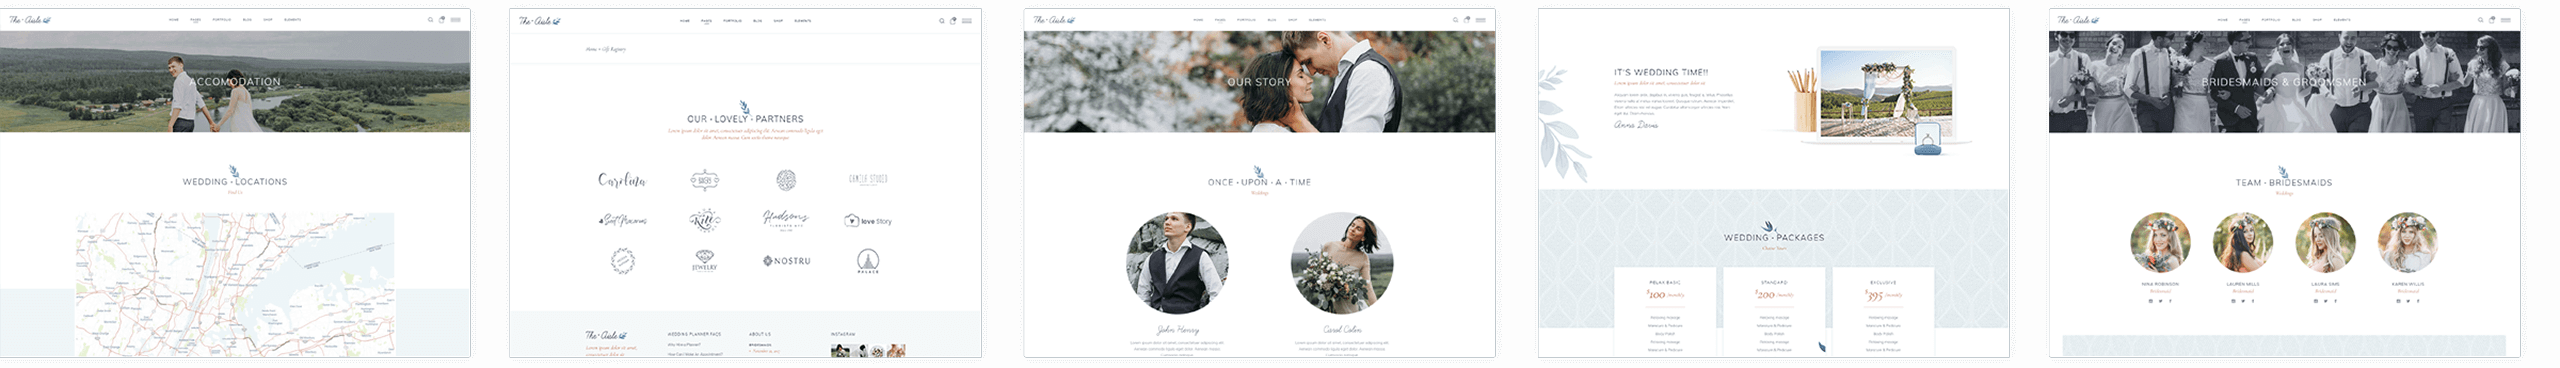 landing-innerpages-1